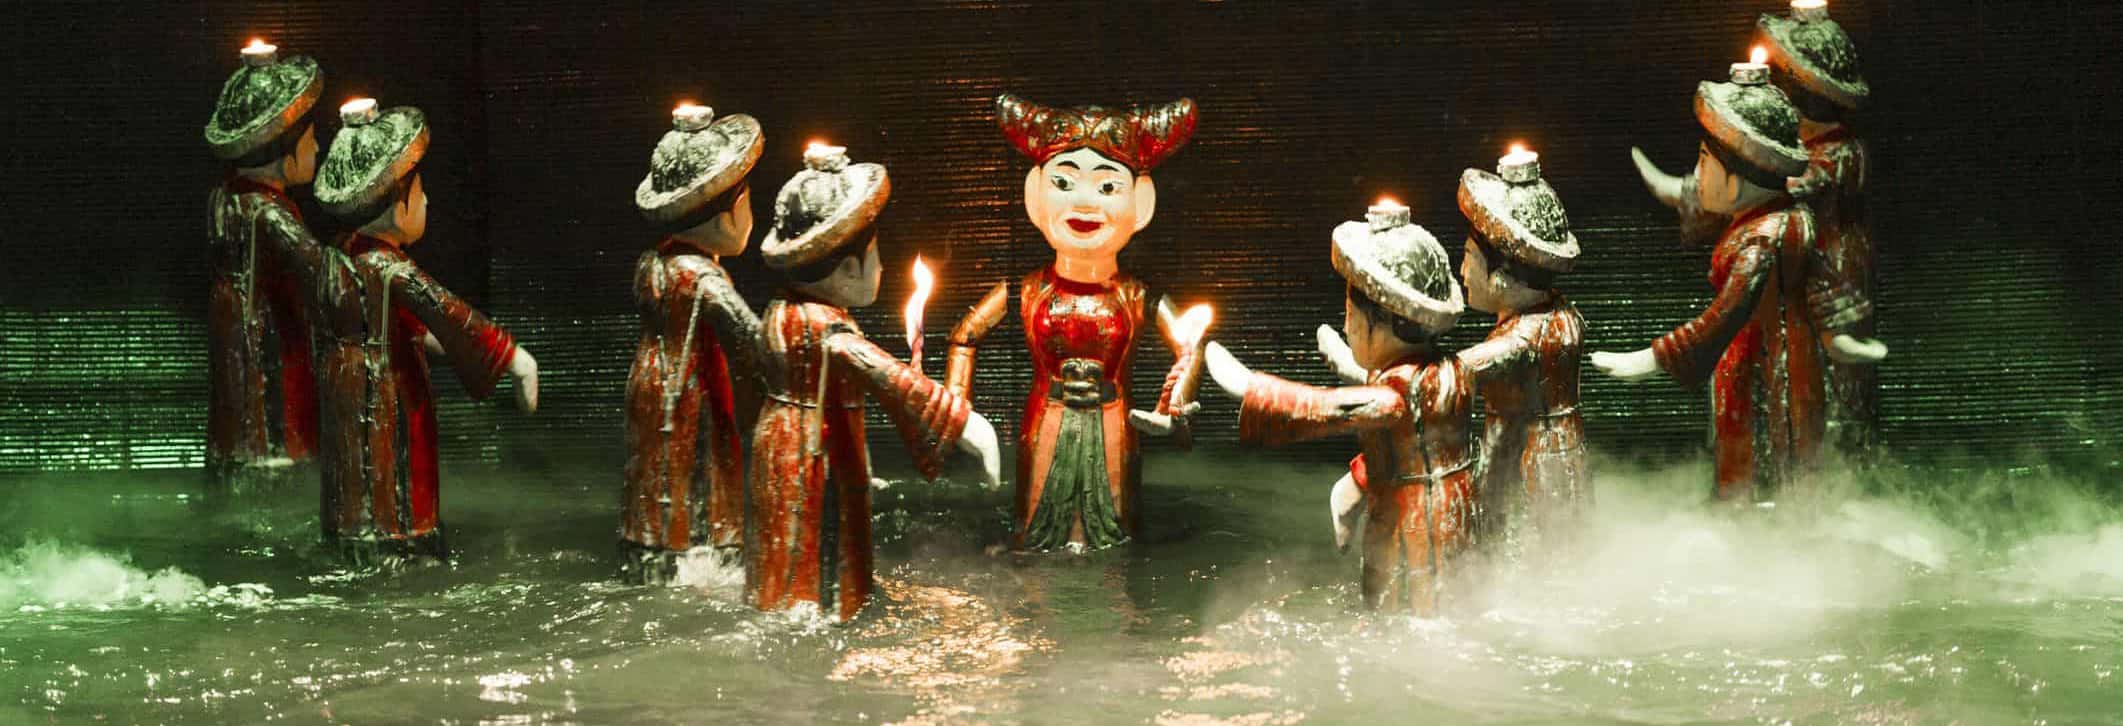 Thang Long Water Puppet Theatre: The Highlight of Hanoi Tourism